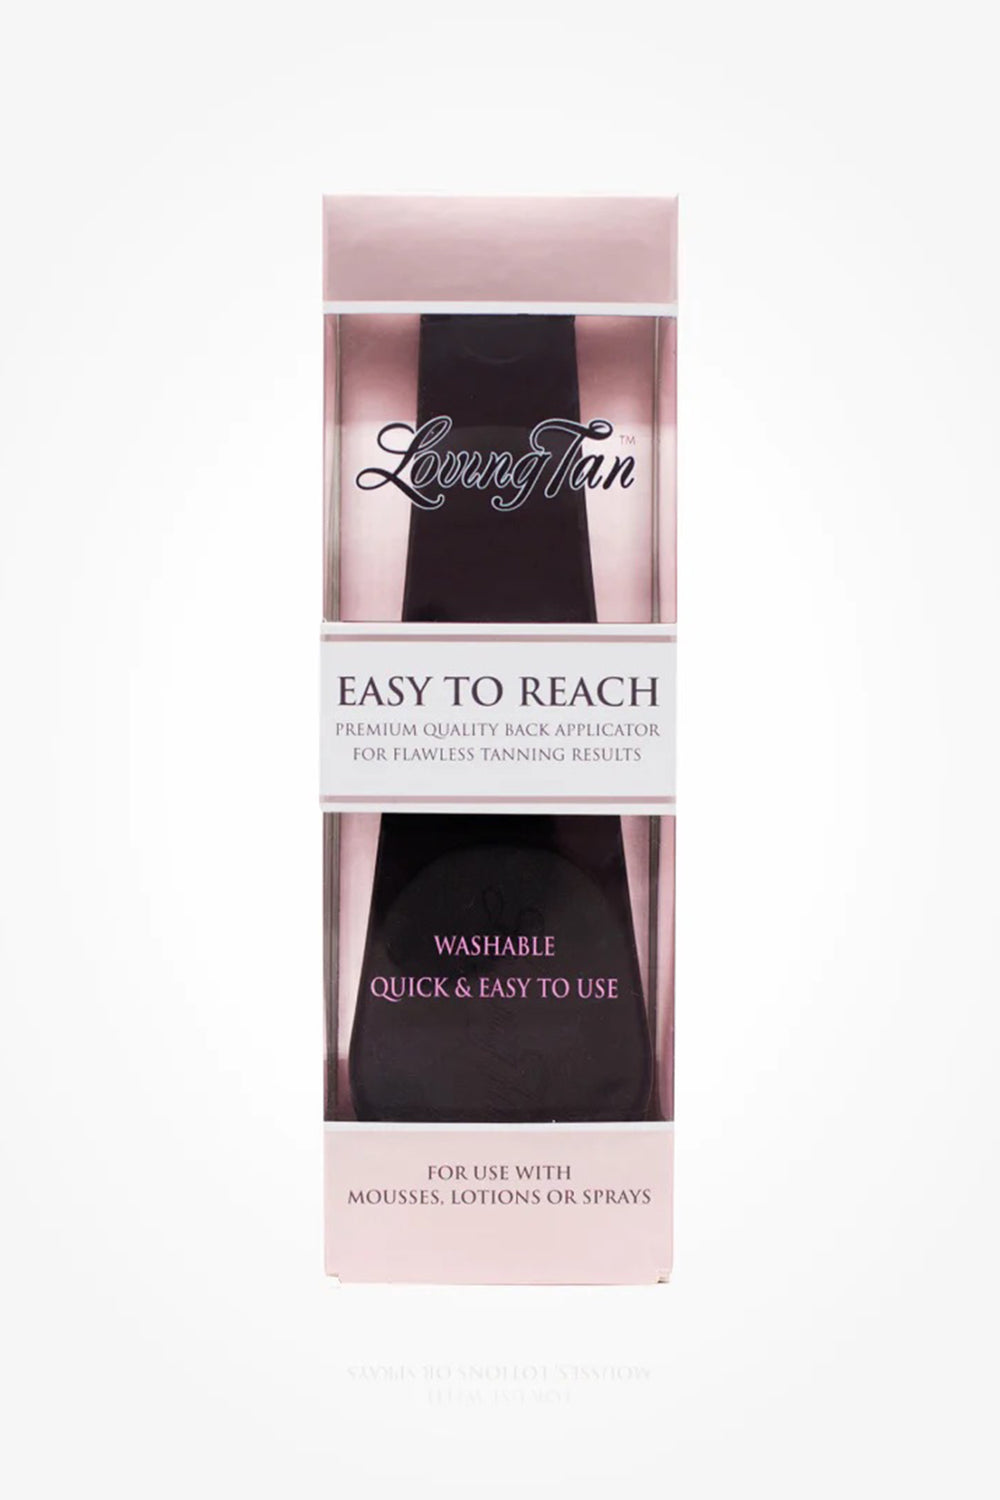 Easy To Reach Back Applicator for Self Tanning